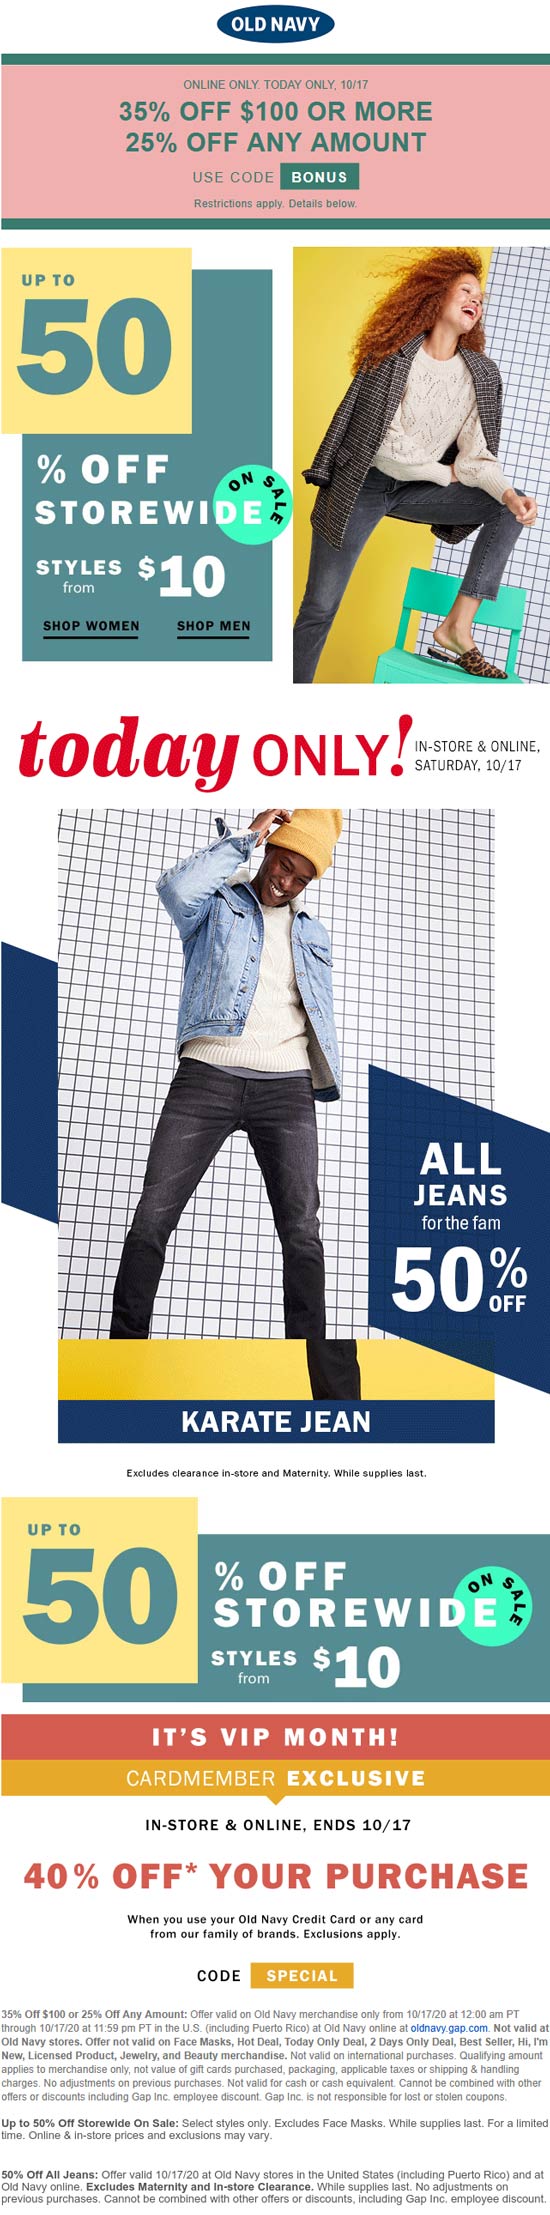 Old Navy stores Coupon  25-30% off online today at Old Navy via promo code BONUS #oldnavy 